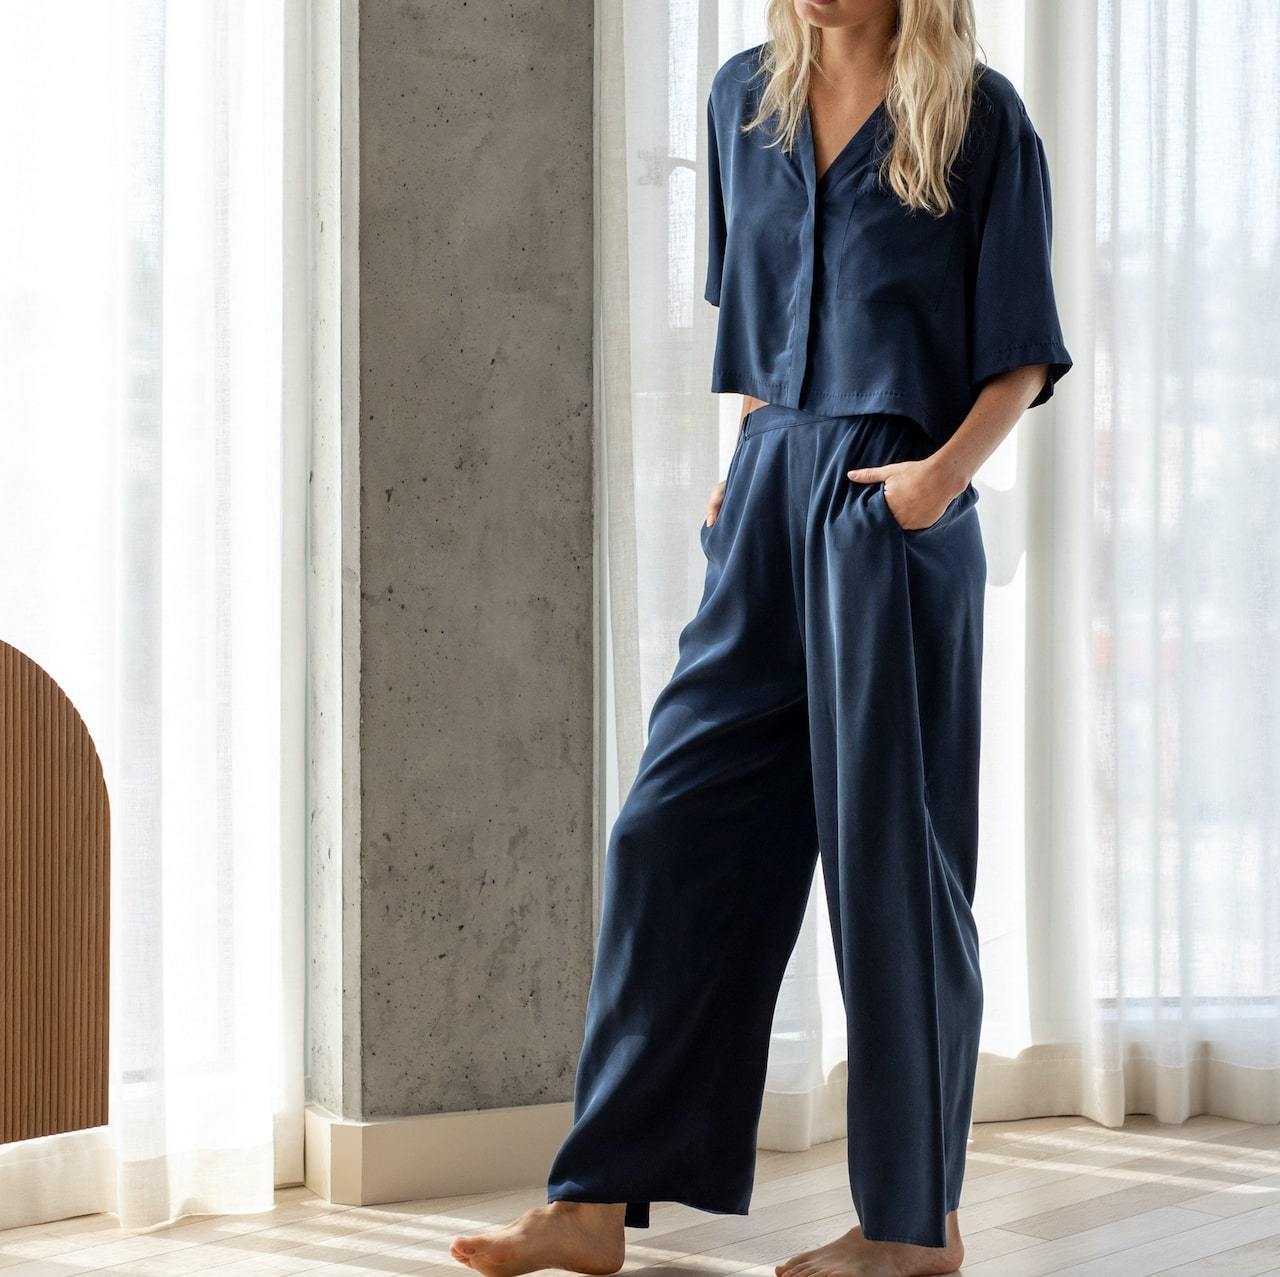 11 Chic Pajama Sets to Lounge in All Day